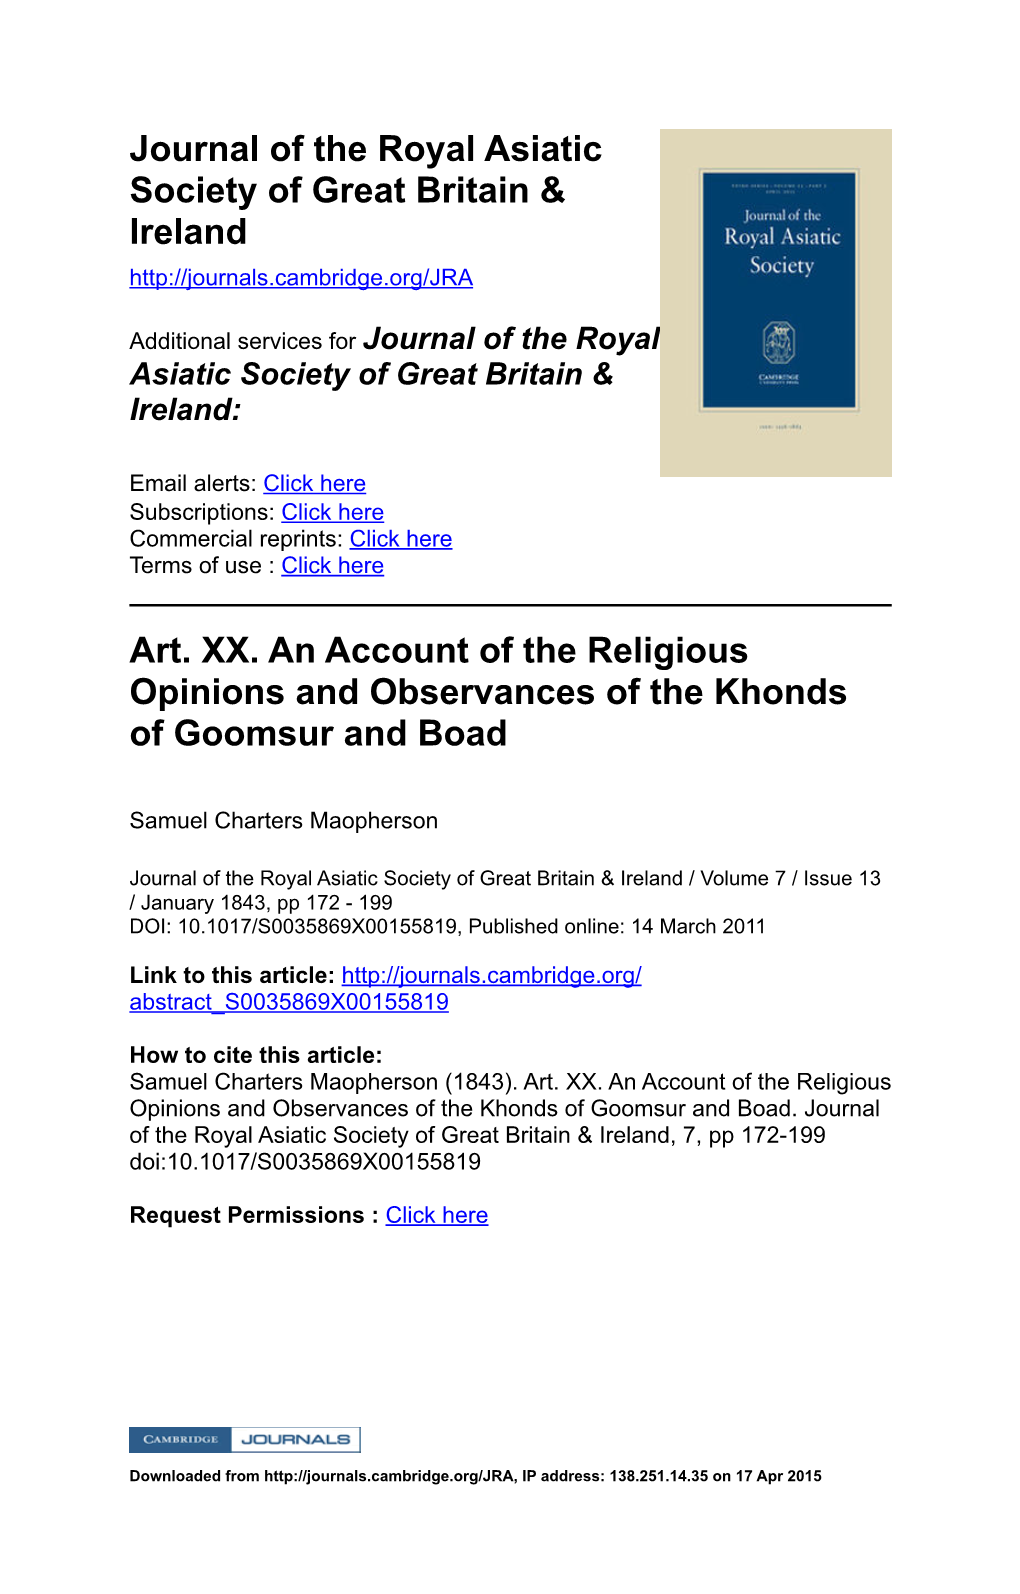 Art. XX. an Account of the Religious Opinions and Observances of the Khonds of Goomsur and Boad